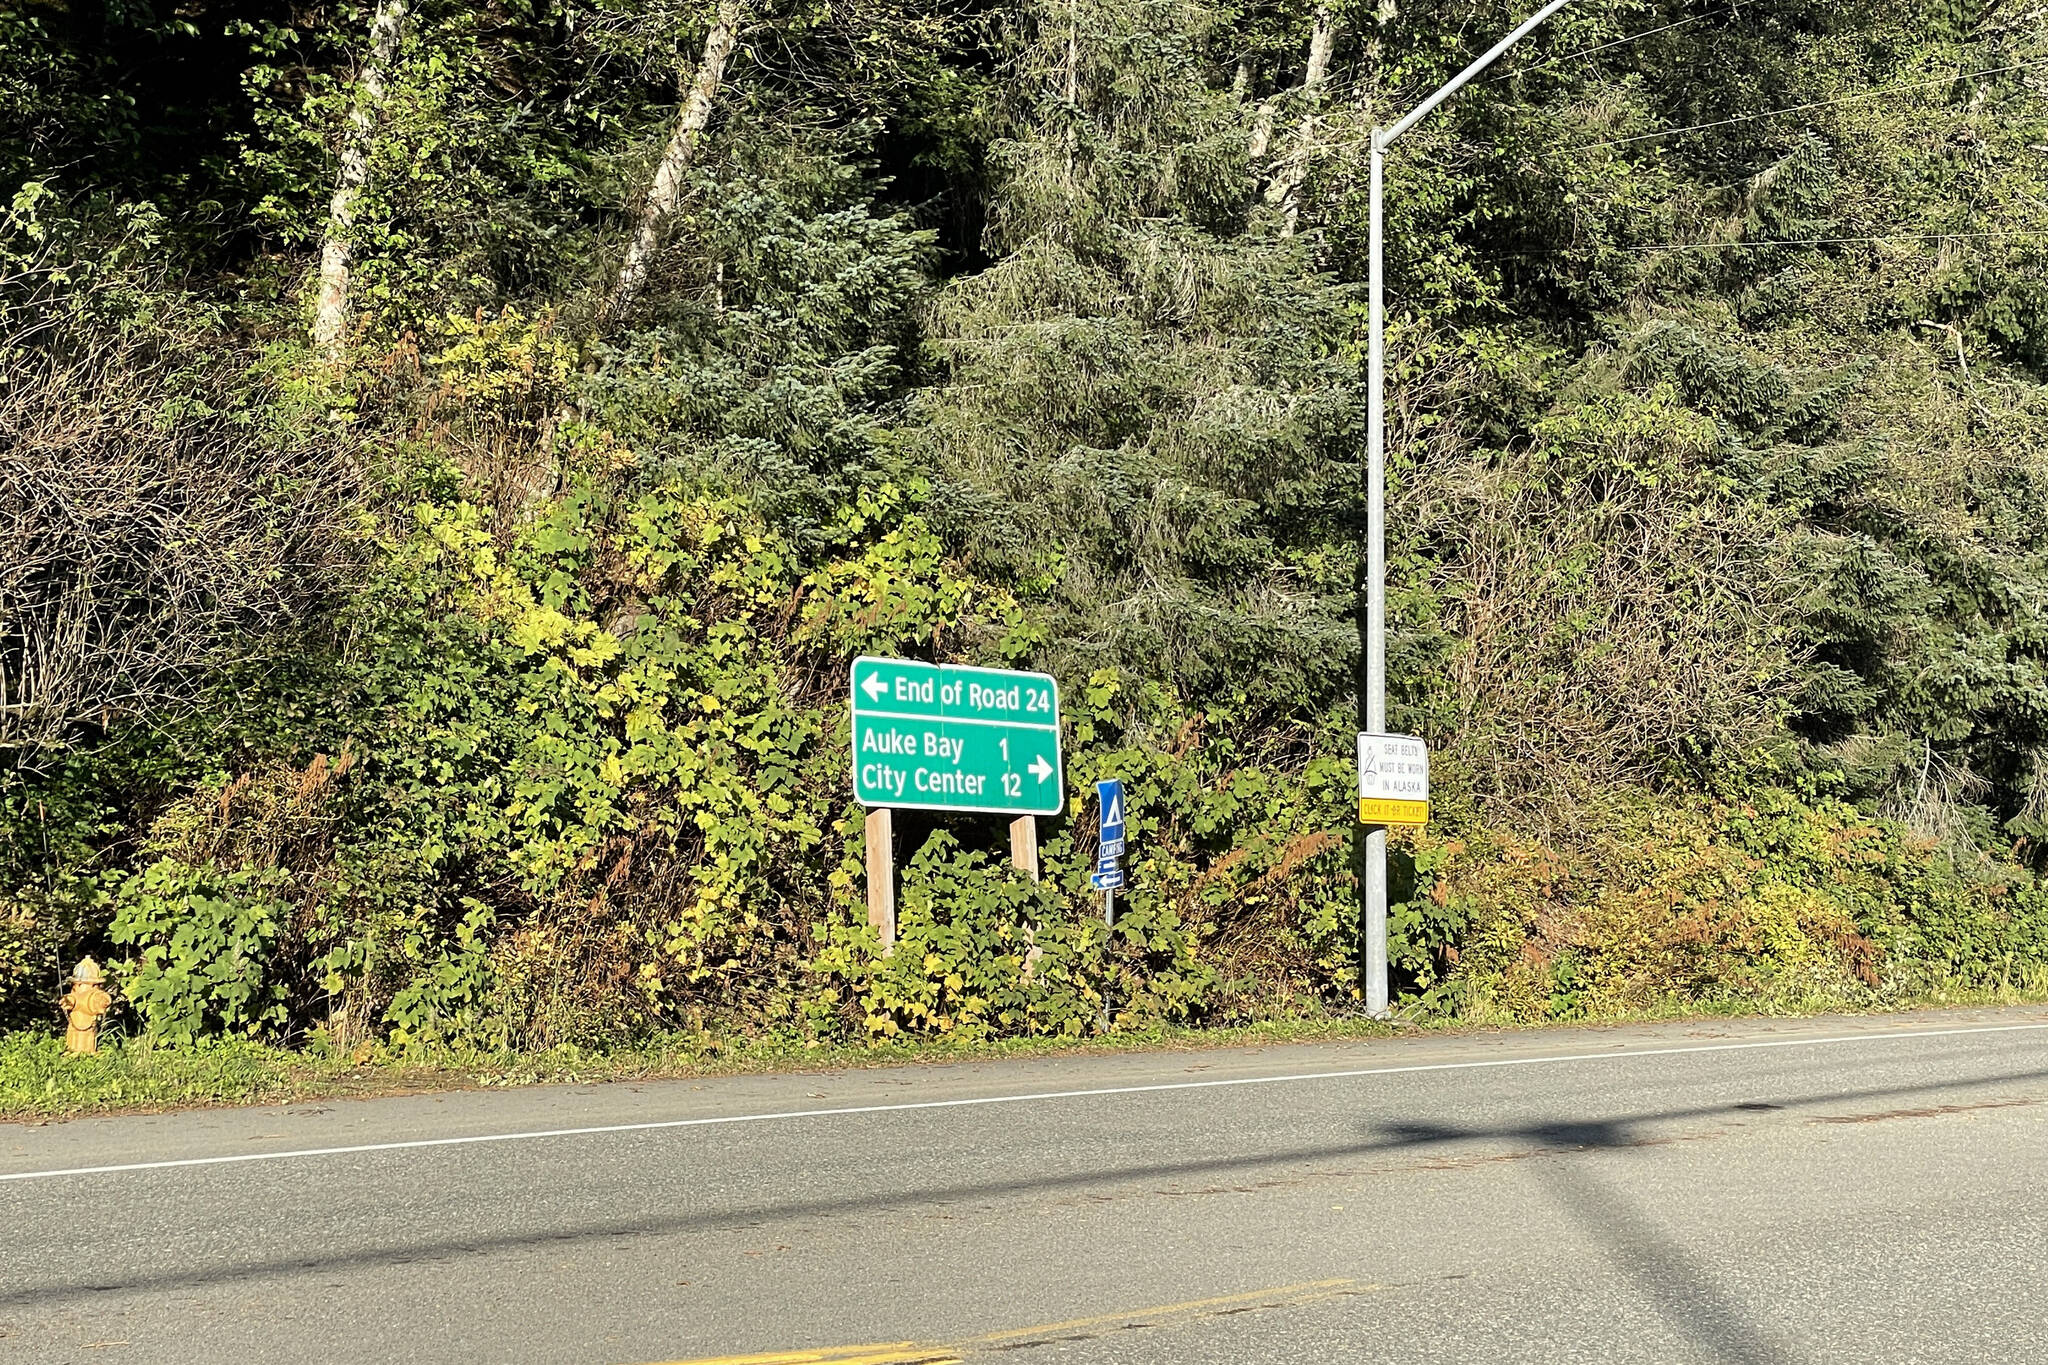 The Juneau Police Department is investigating a body found in the woods across from the Auke Bay Ferry Terminal on Tuesday, Oct. 5, 2021. (Michael S. Lockett / Juneau Empire)